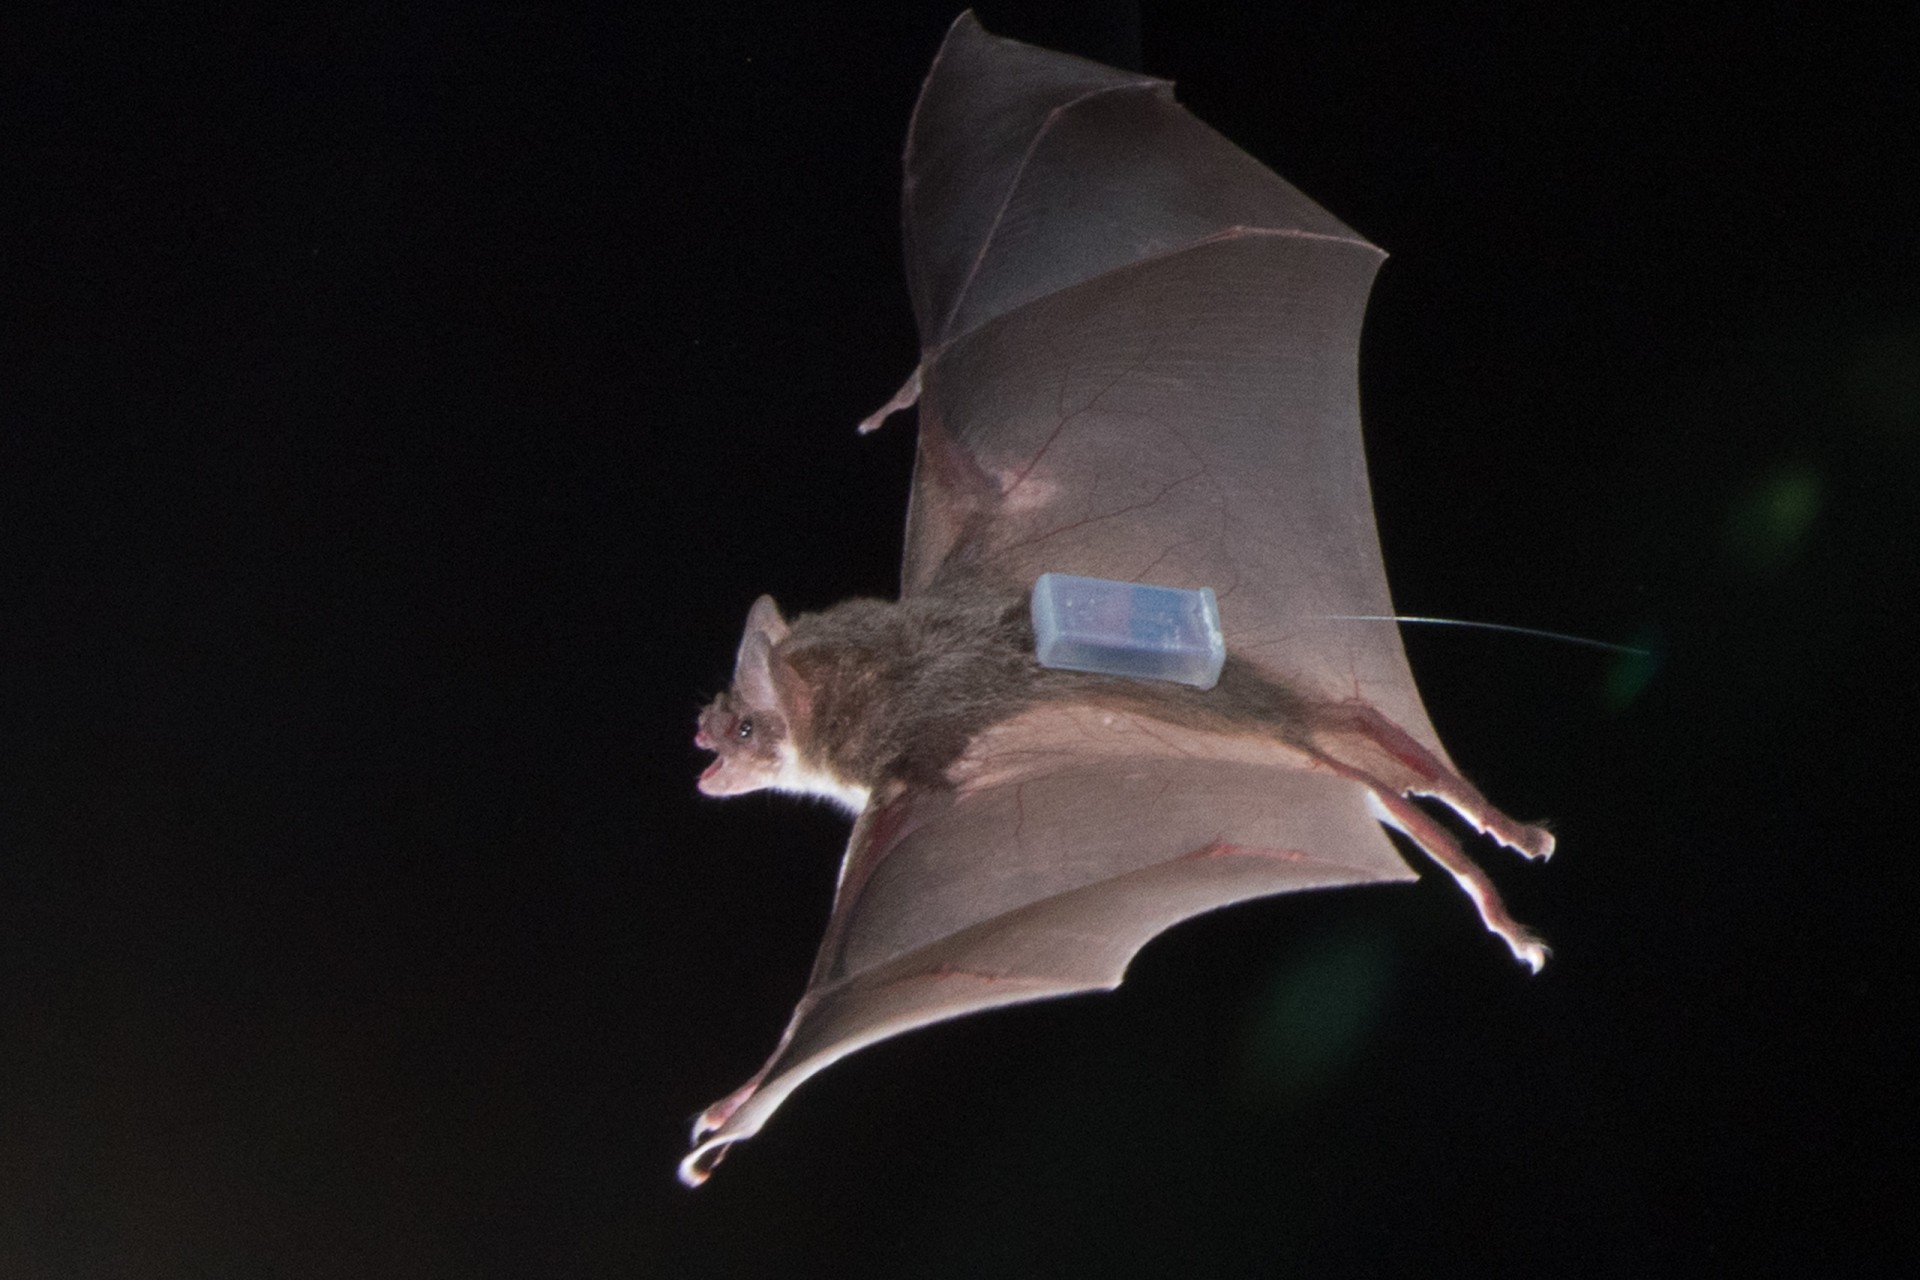 Vampire bat bonding persists from the lab to the wild